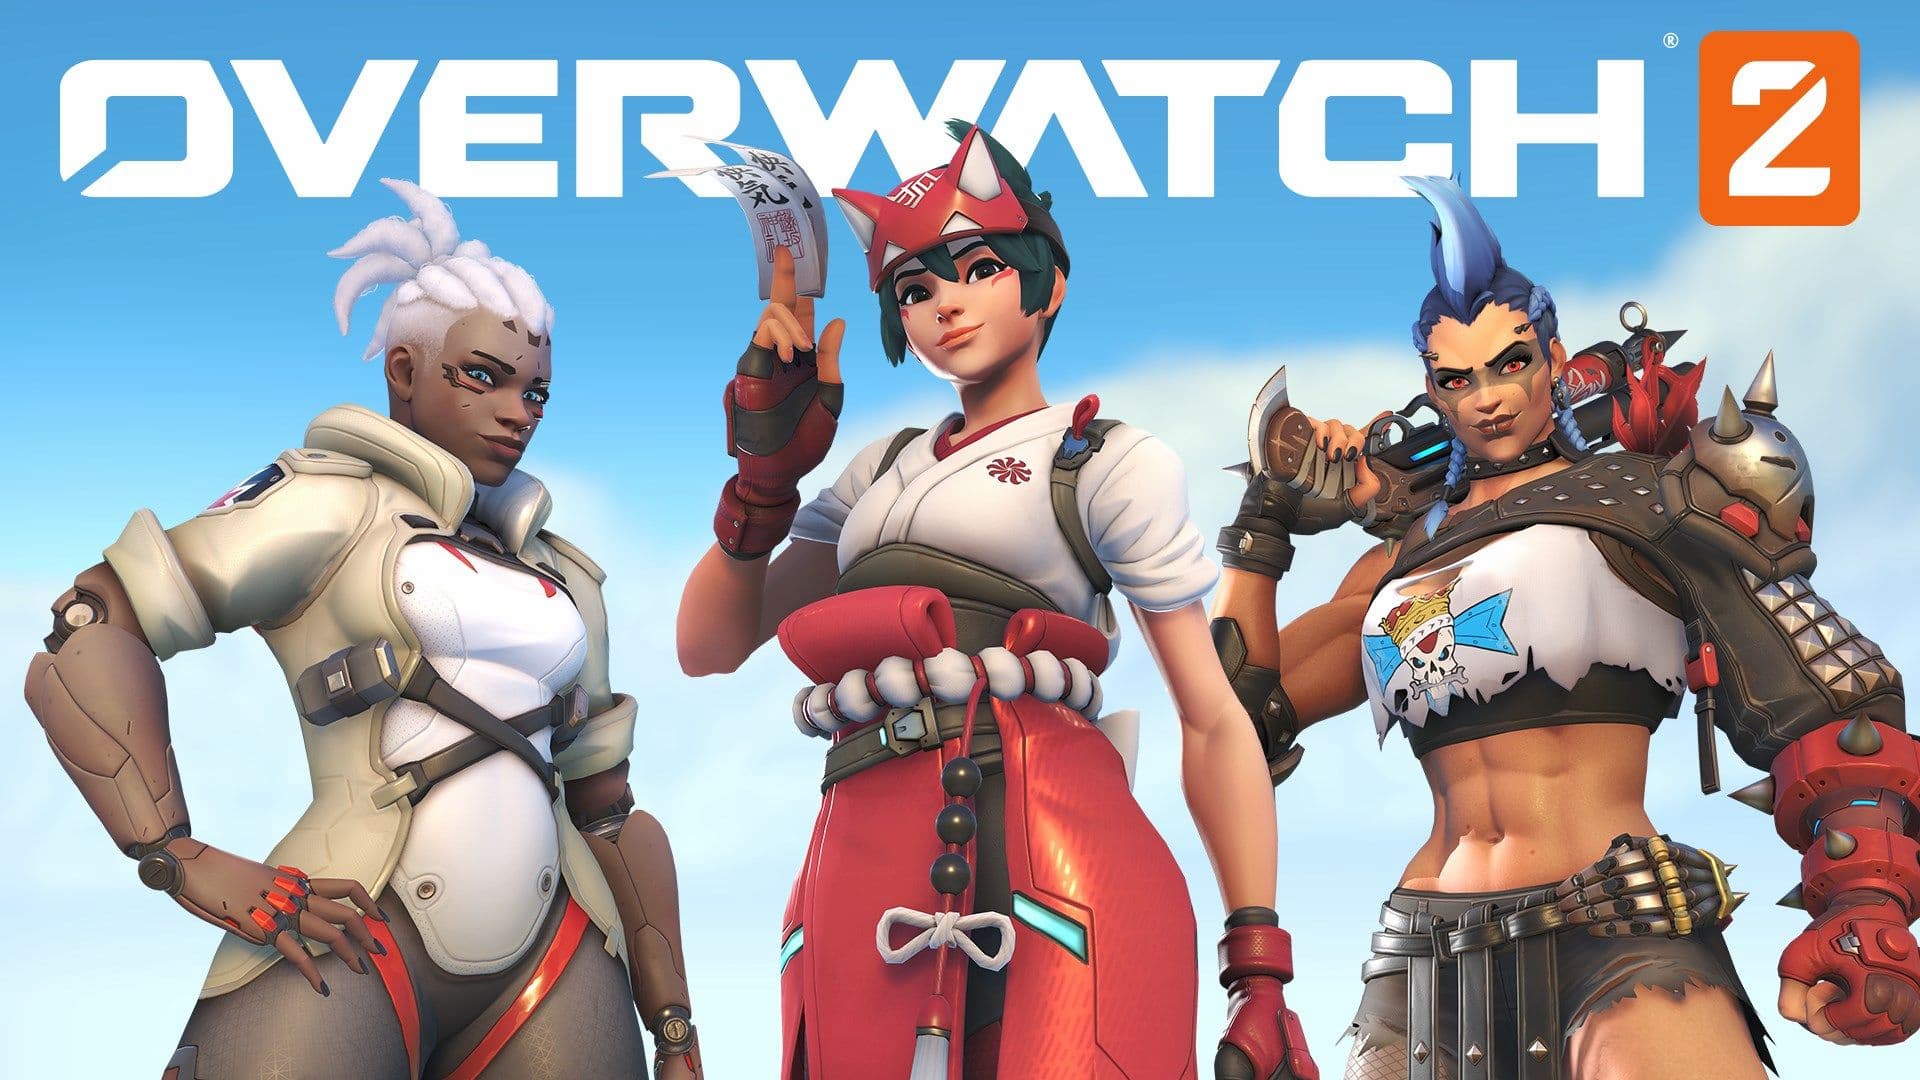 One of the main promotional for Blizzard's Overwatch 2